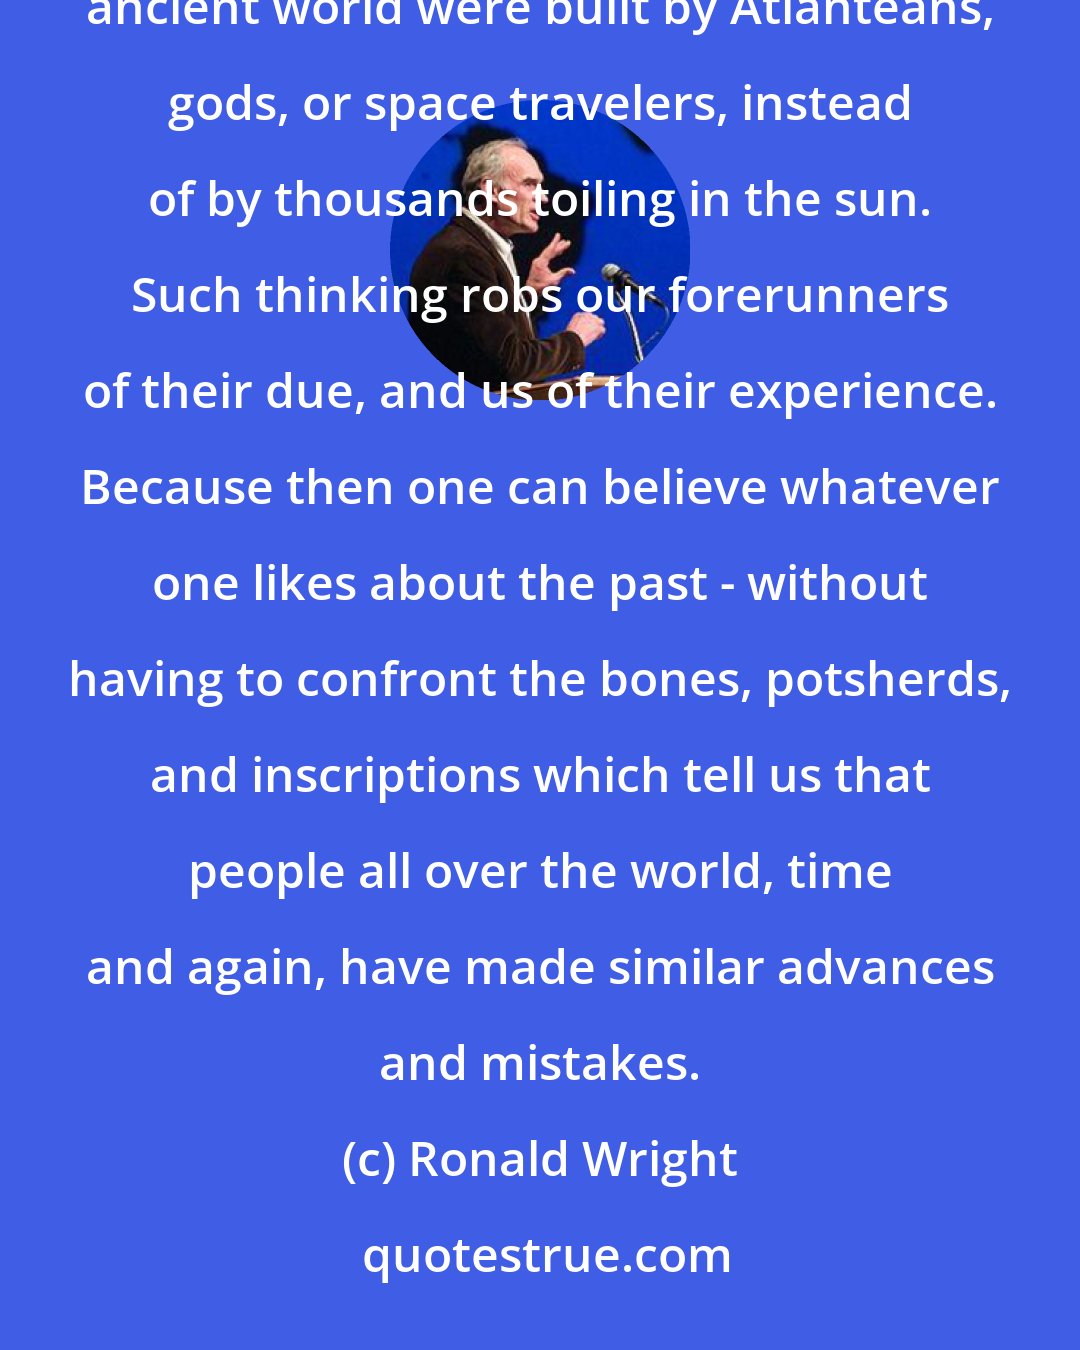 Ronald Wright: Even today, some opt for the comforts of mystification, preferring to believe that the wonders of the ancient world were built by Atlanteans, gods, or space travelers, instead of by thousands toiling in the sun. Such thinking robs our forerunners of their due, and us of their experience. Because then one can believe whatever one likes about the past - without having to confront the bones, potsherds, and inscriptions which tell us that people all over the world, time and again, have made similar advances and mistakes.